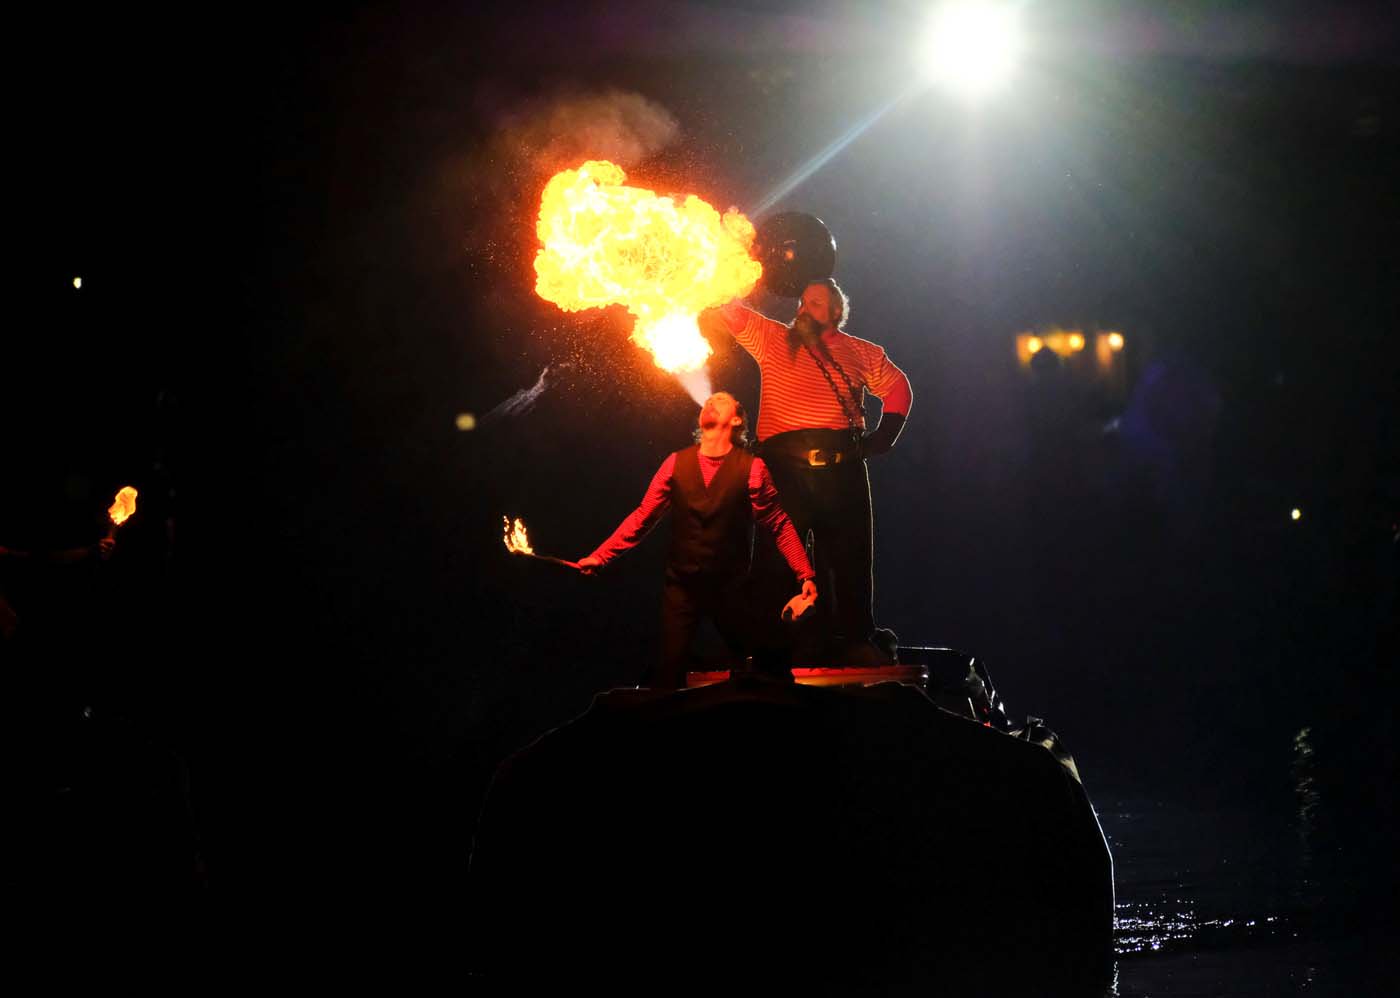 Fire-eaters perform during the opening ceremony of the Carnival in Venice, Italy January 27, 2018. REUTERS/Manuel Silvestri